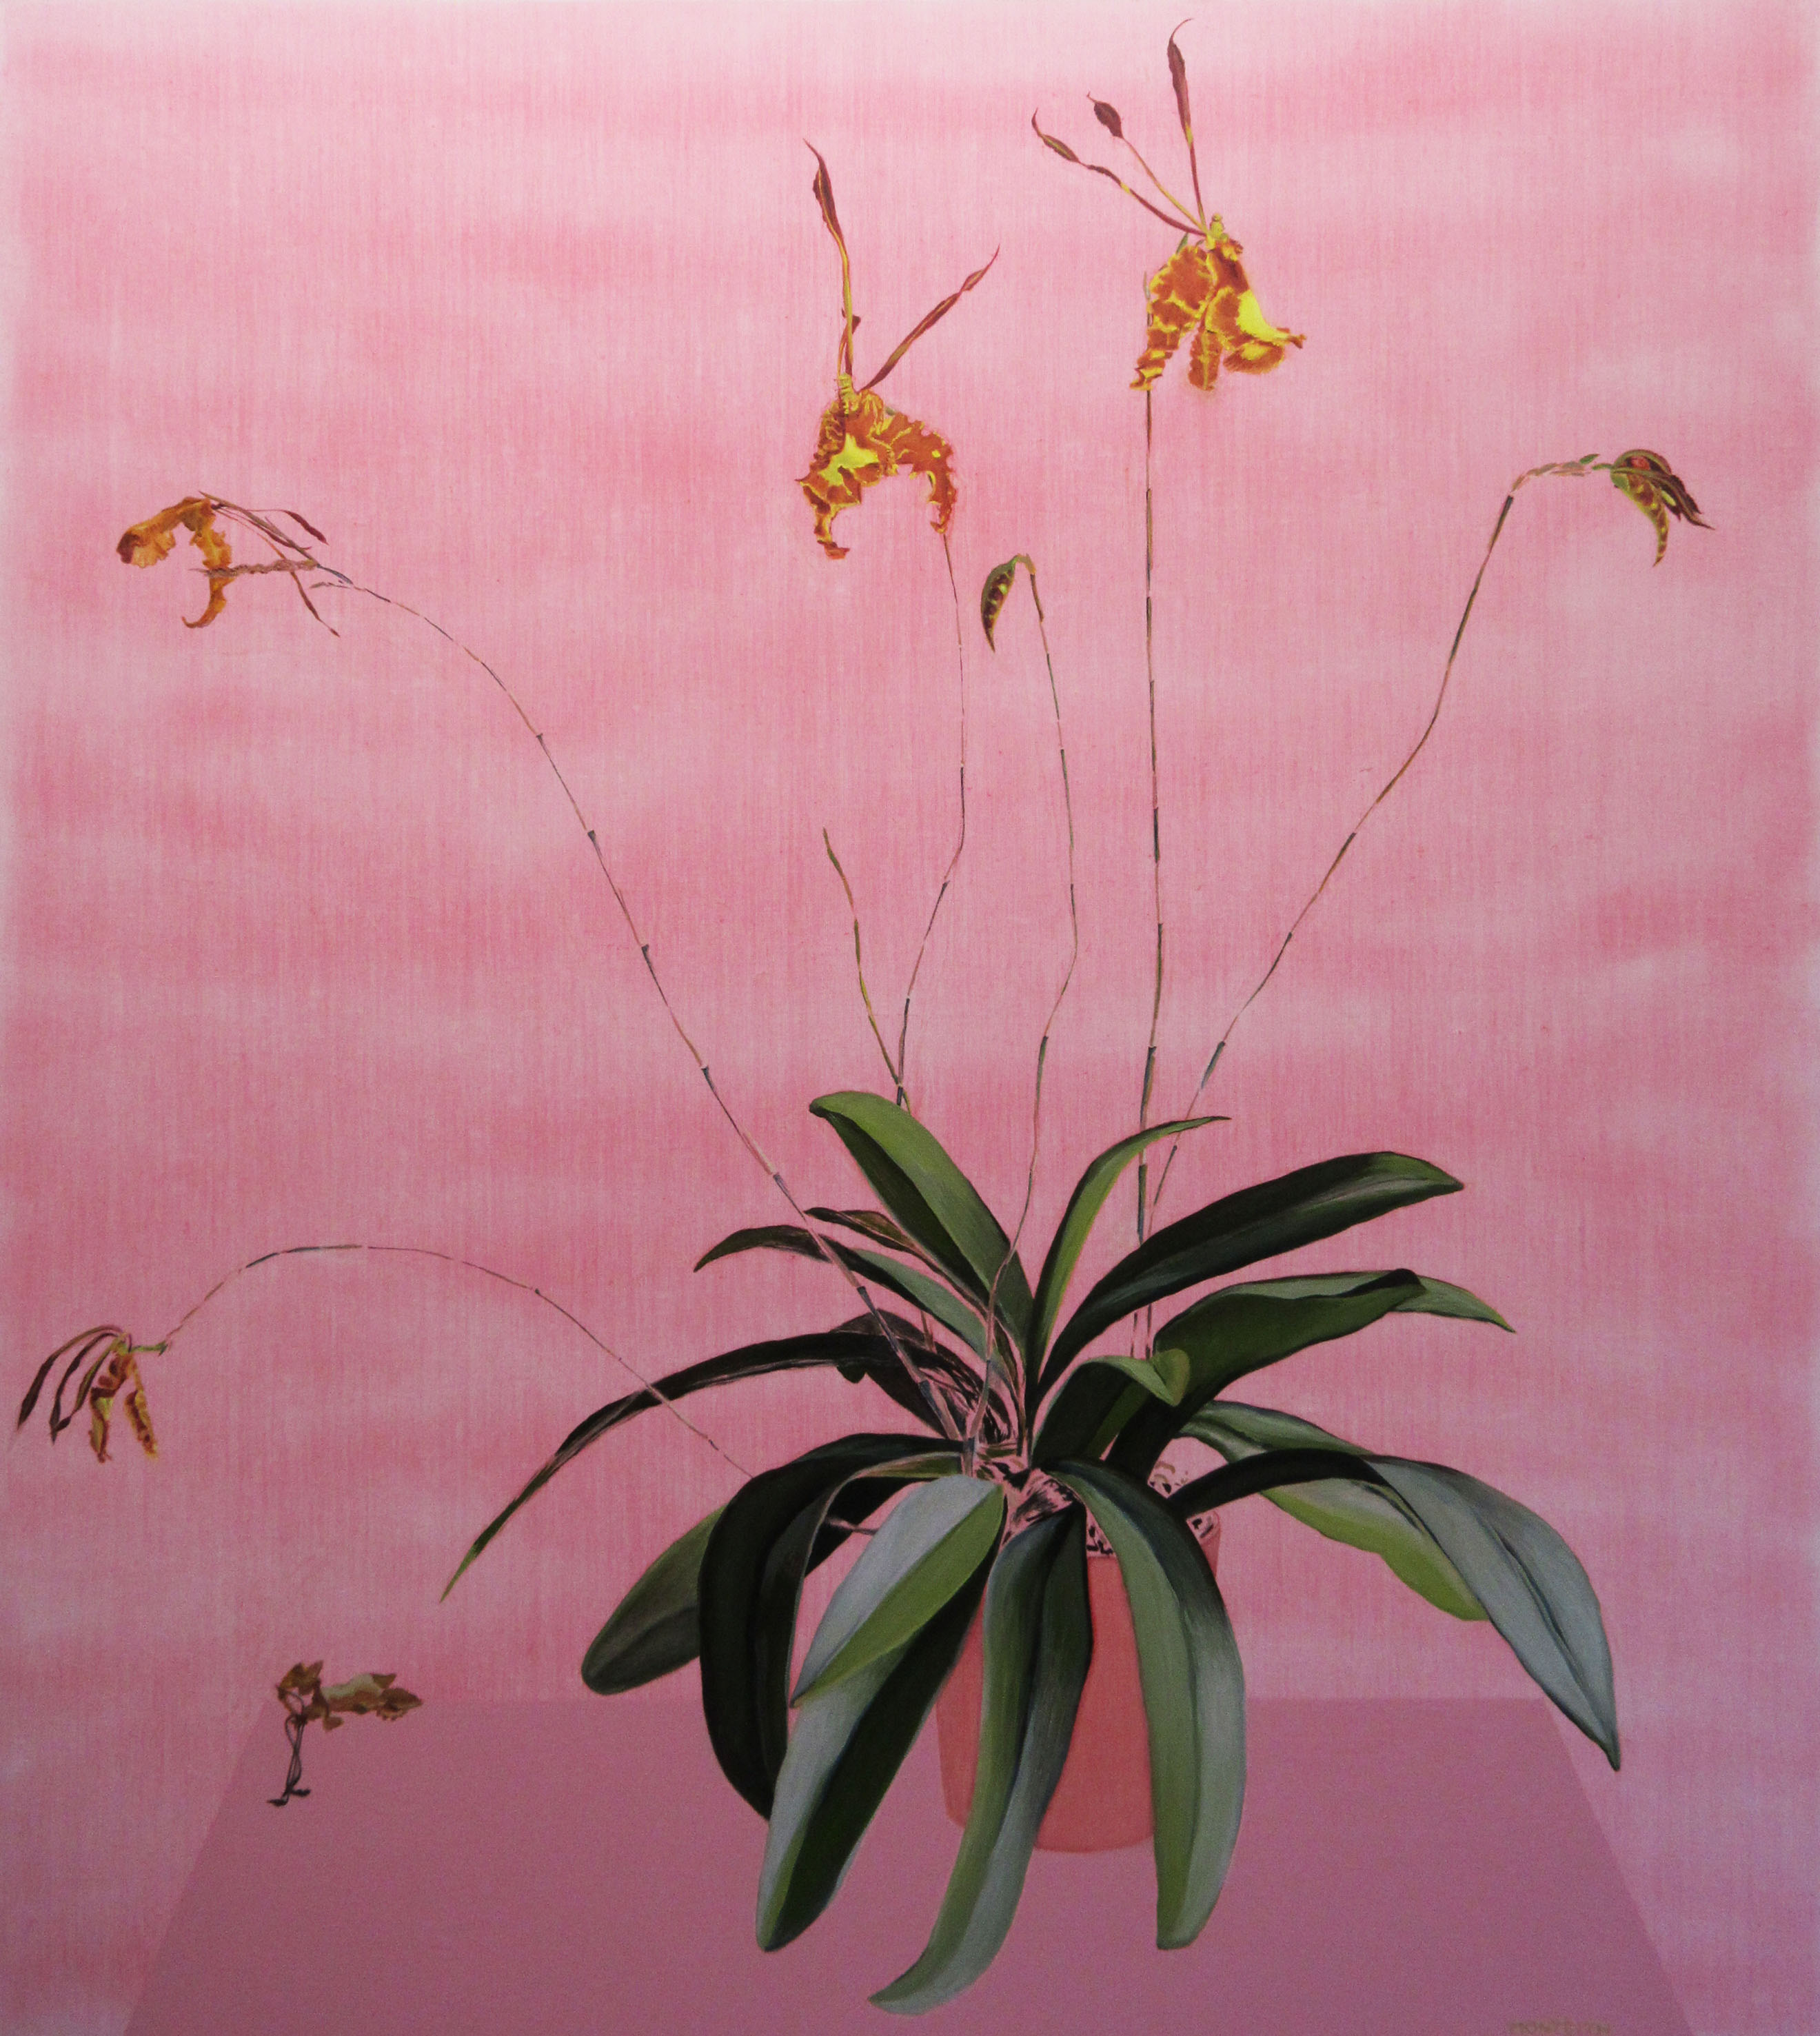 Oil painting of an orchid plant with yellow flowers on a pink background.